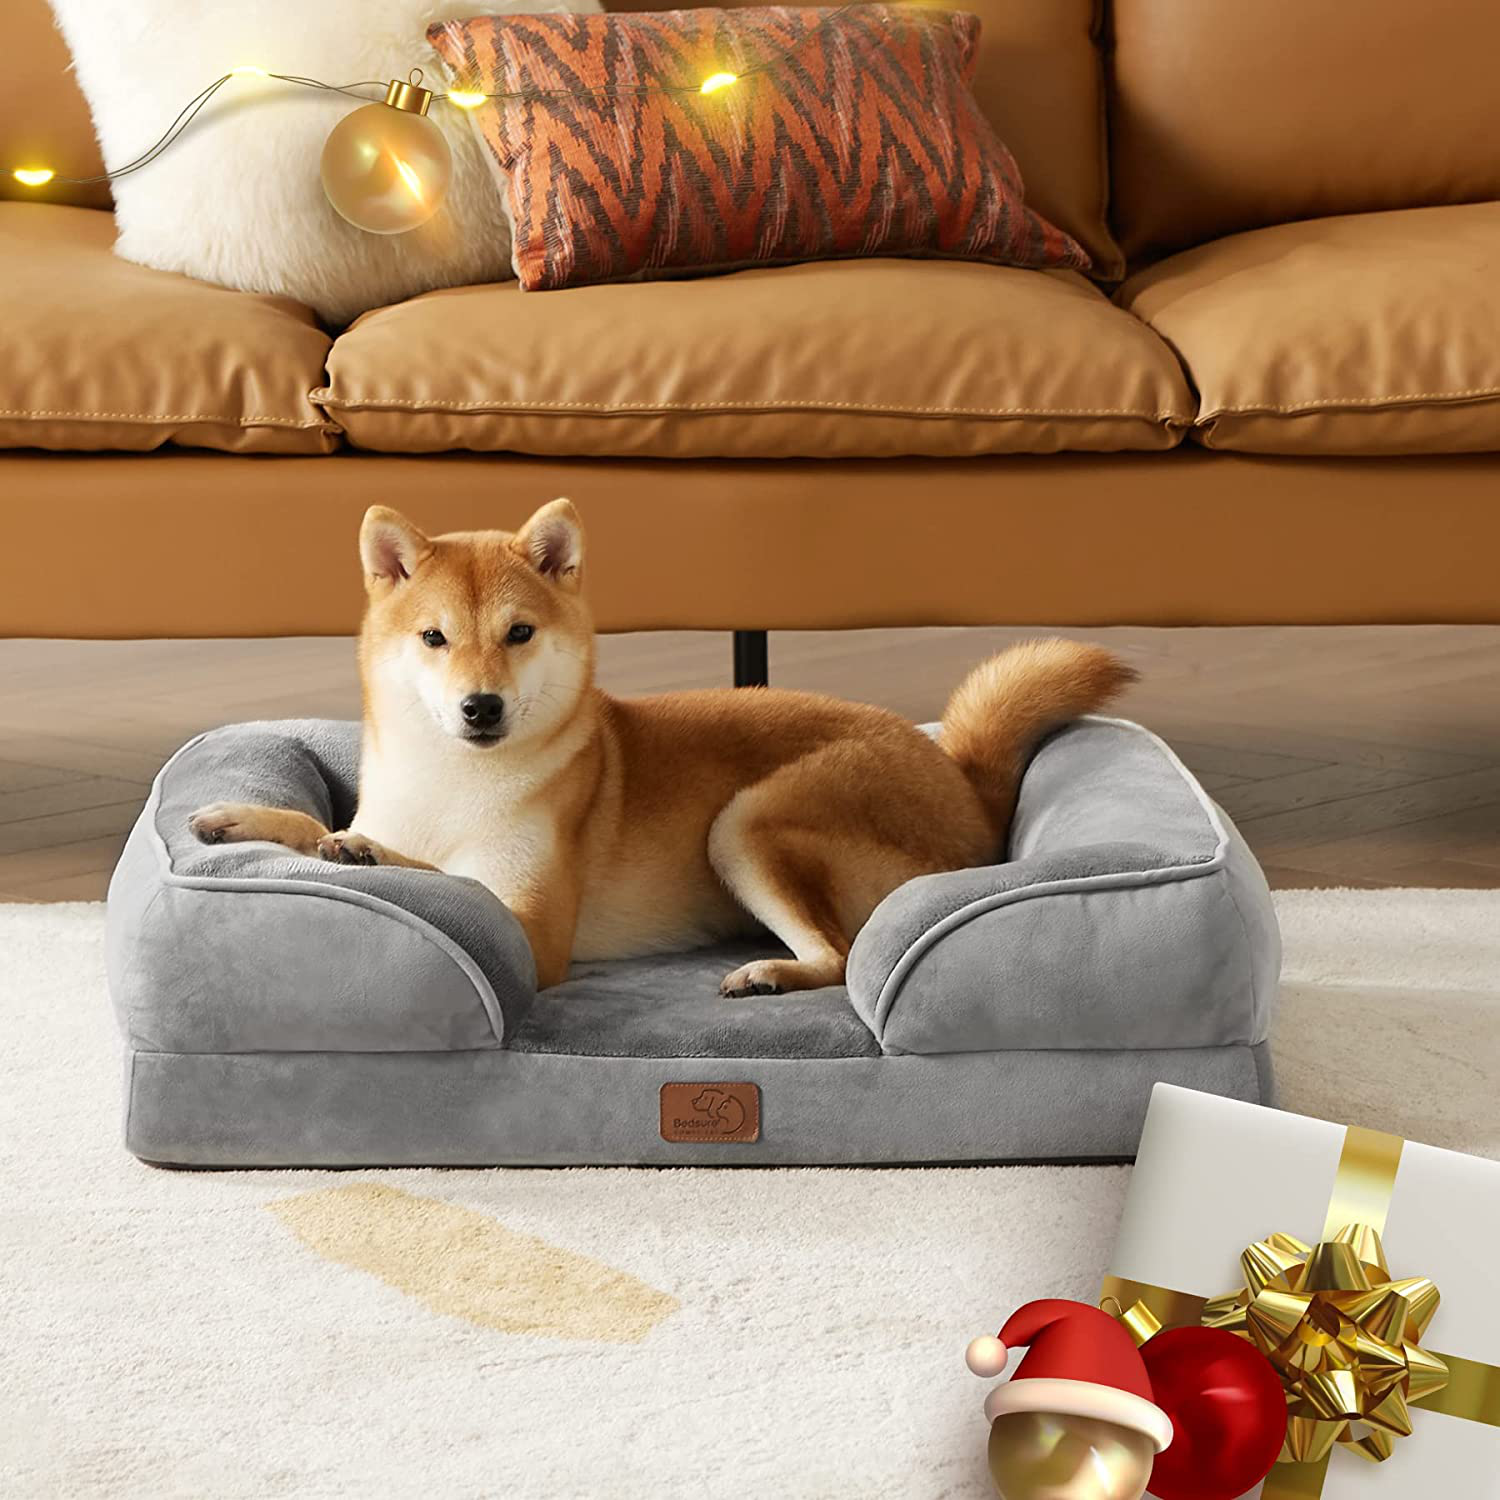 Bedsure Orthopedic Dog Bed, Bolster Dog Beds for Medium/Large/Extra Large Dogs - Foam Sofa with Removable Washable Cover, Waterproof Lining and Nonskid Bottom Couch